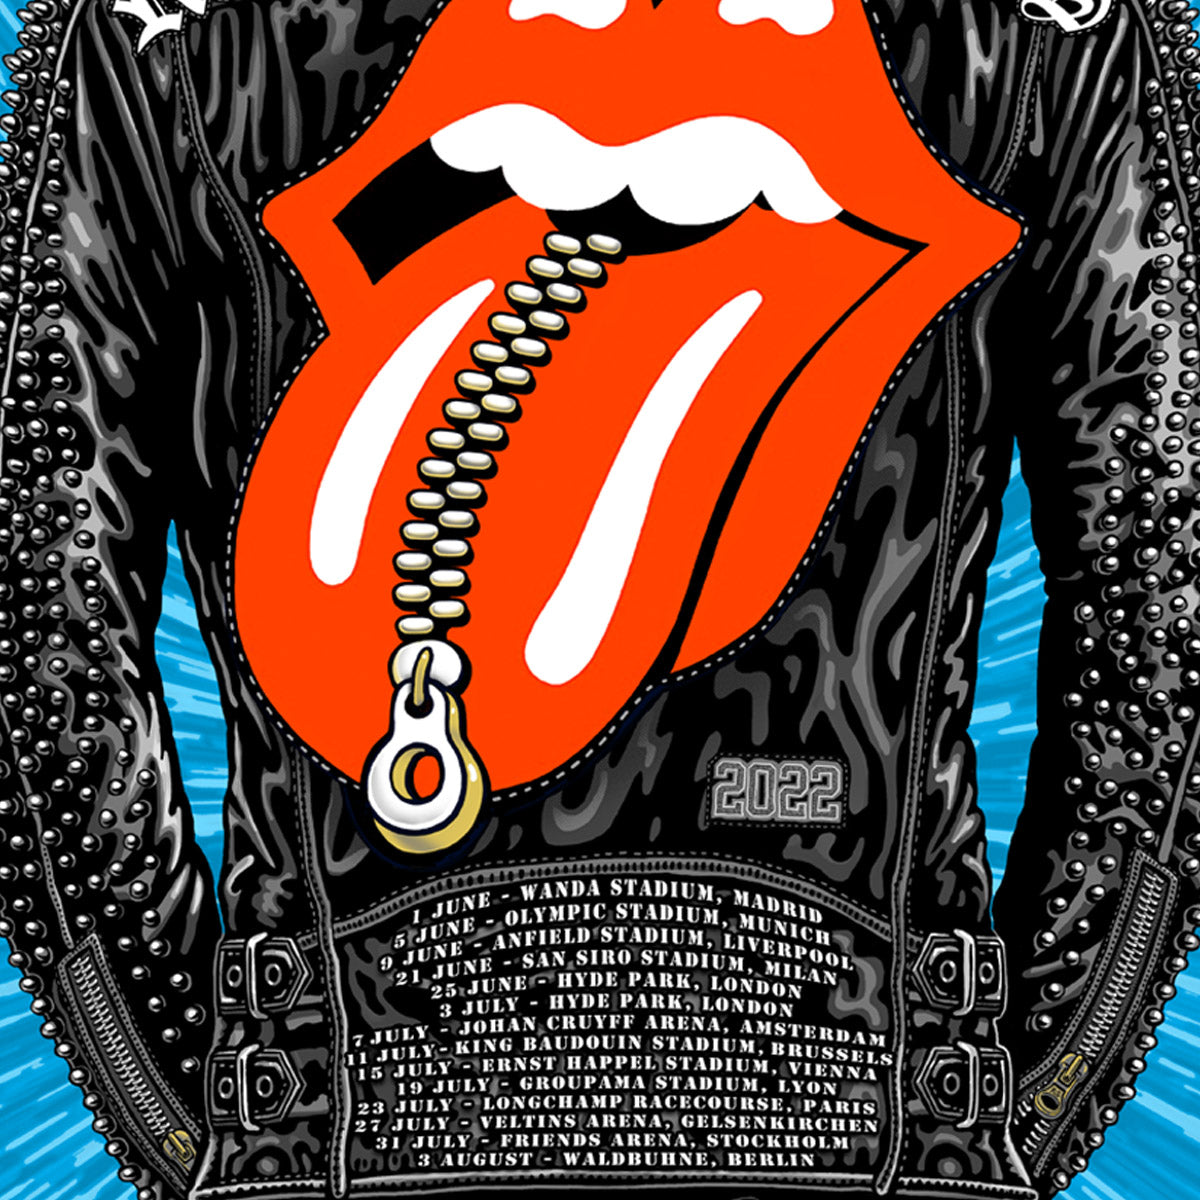 Rolling Stones Sixty Tour by Emek (Regular Edition)